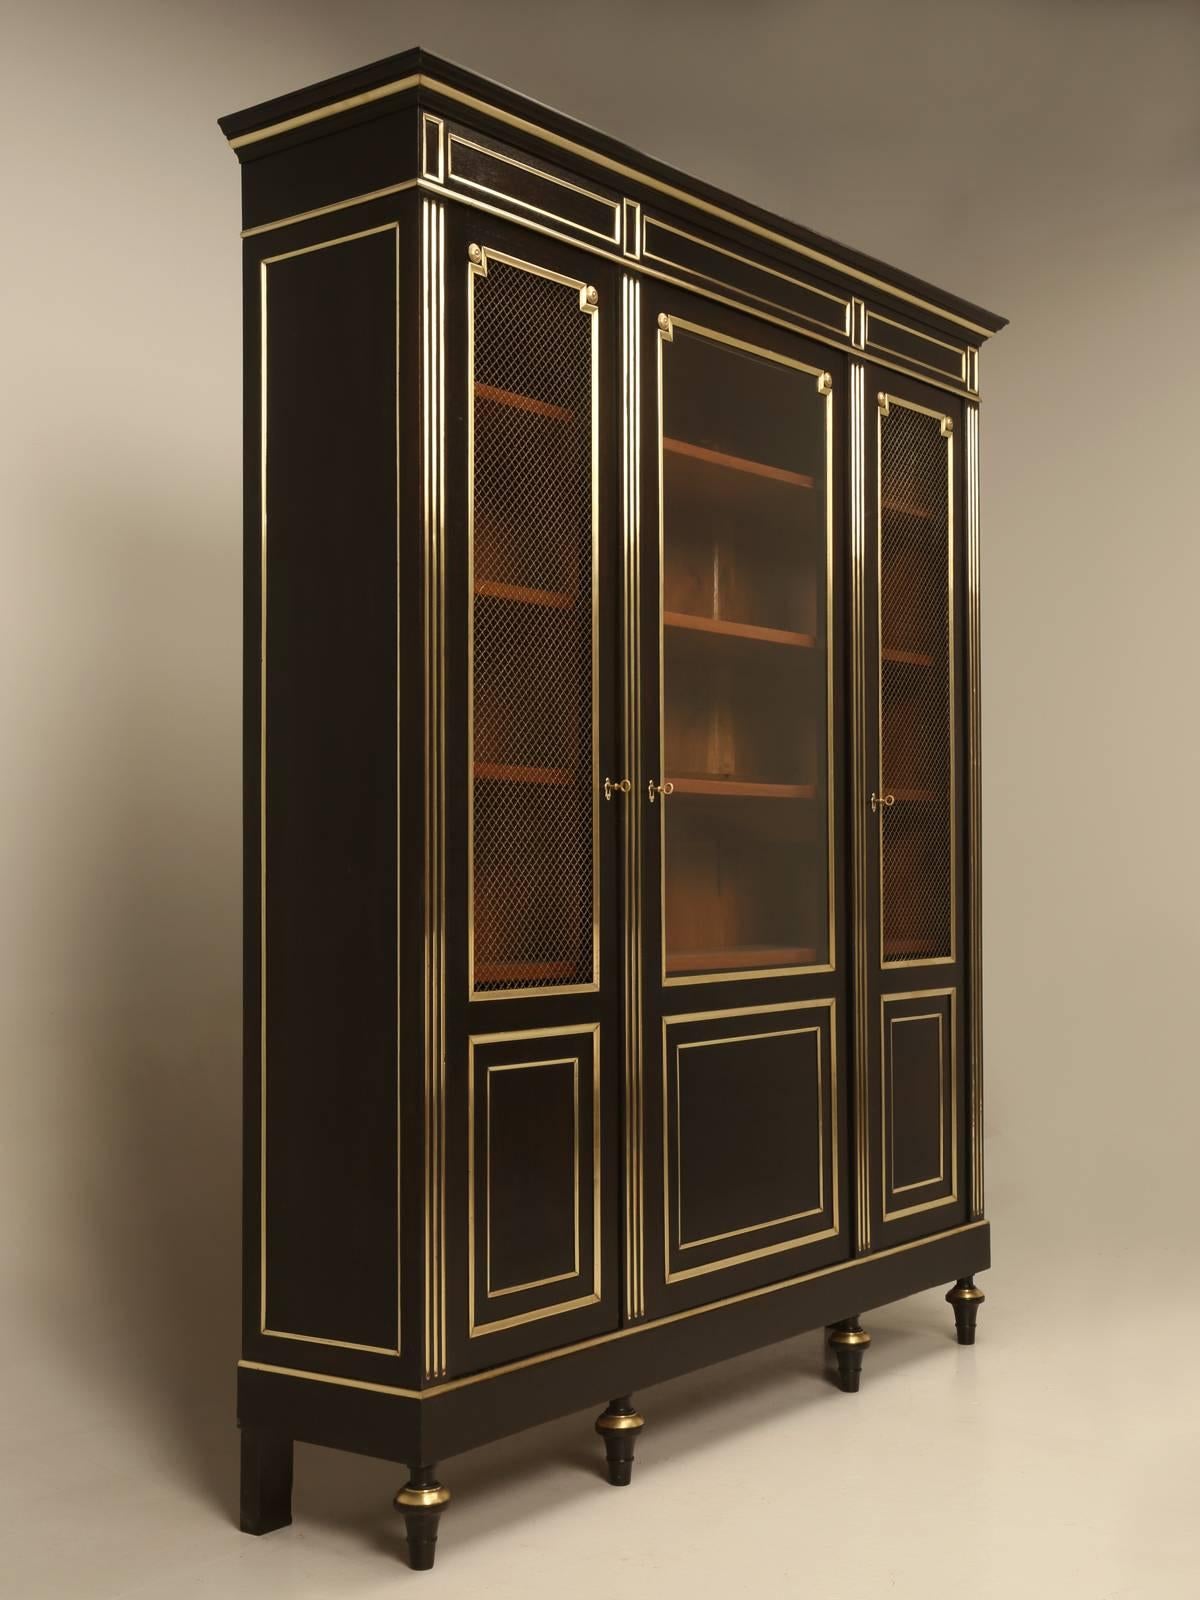 Antique French Louis XVI style ebonized bookcase, or as the French would all it, a bibliotheque. Our old plank workshop completely disassembled the bookcase and hand scraped and hand sanded the solid mahogany cabinet, before sending it into our